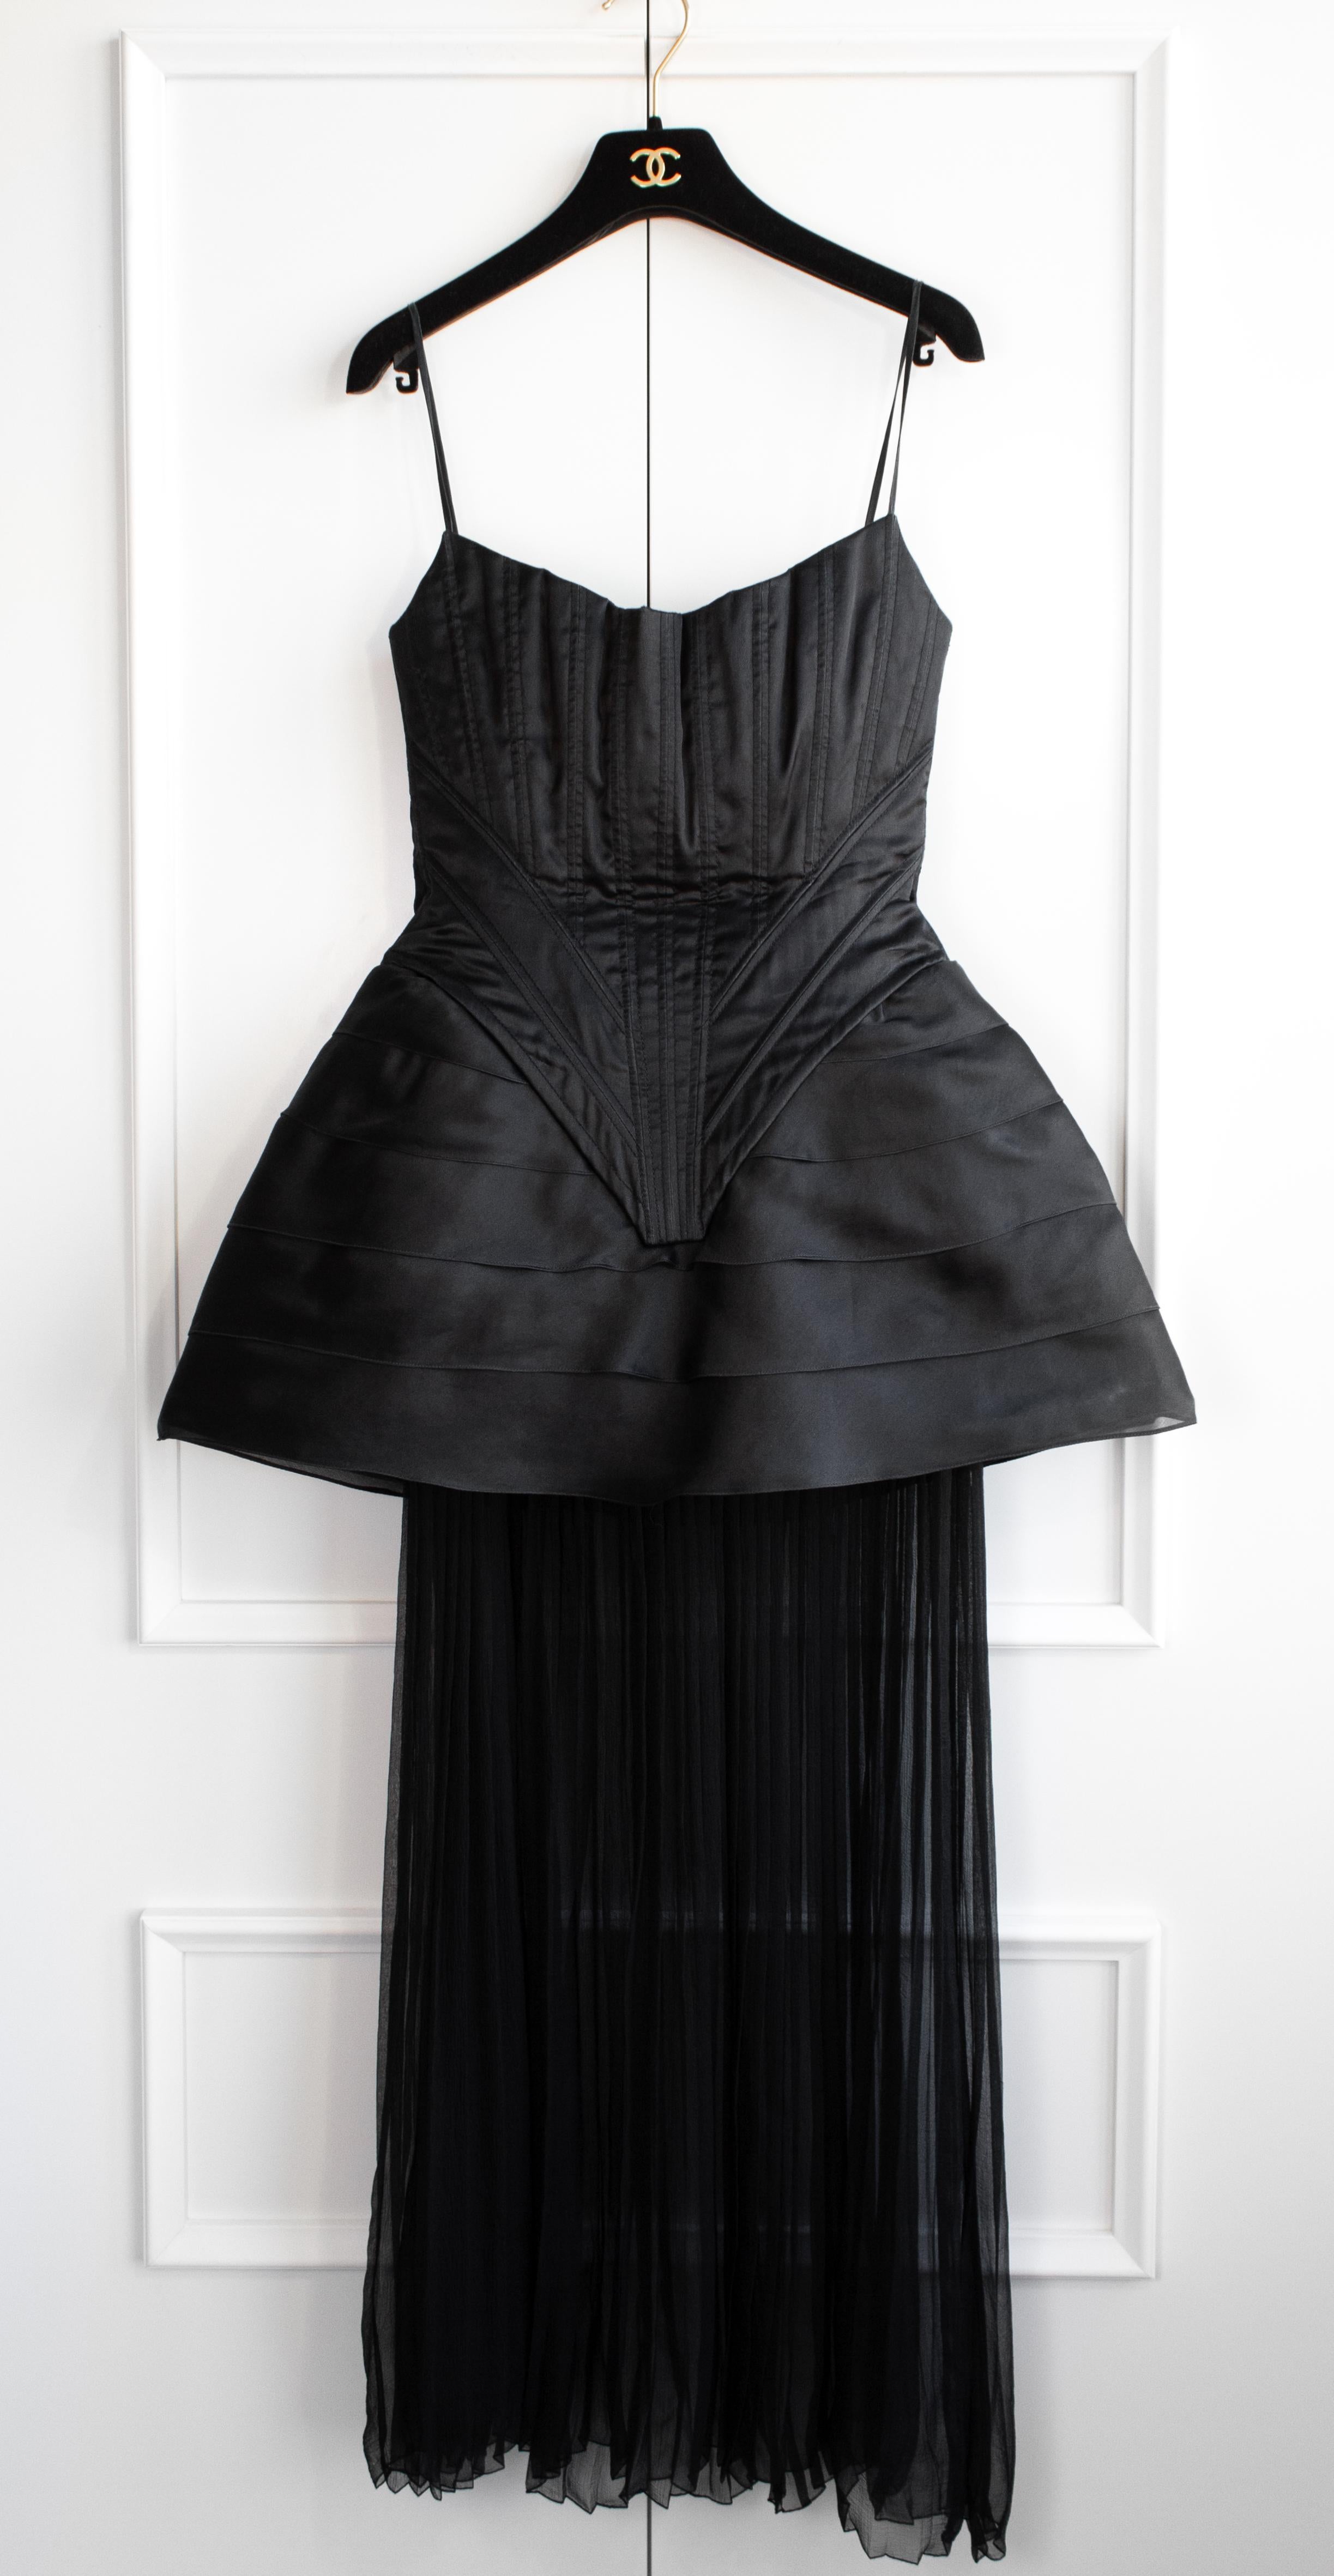 Chanel Vintage Haute Couture Fall/Winter 1992 Black Satin Corset Gown Dress For Sale 1